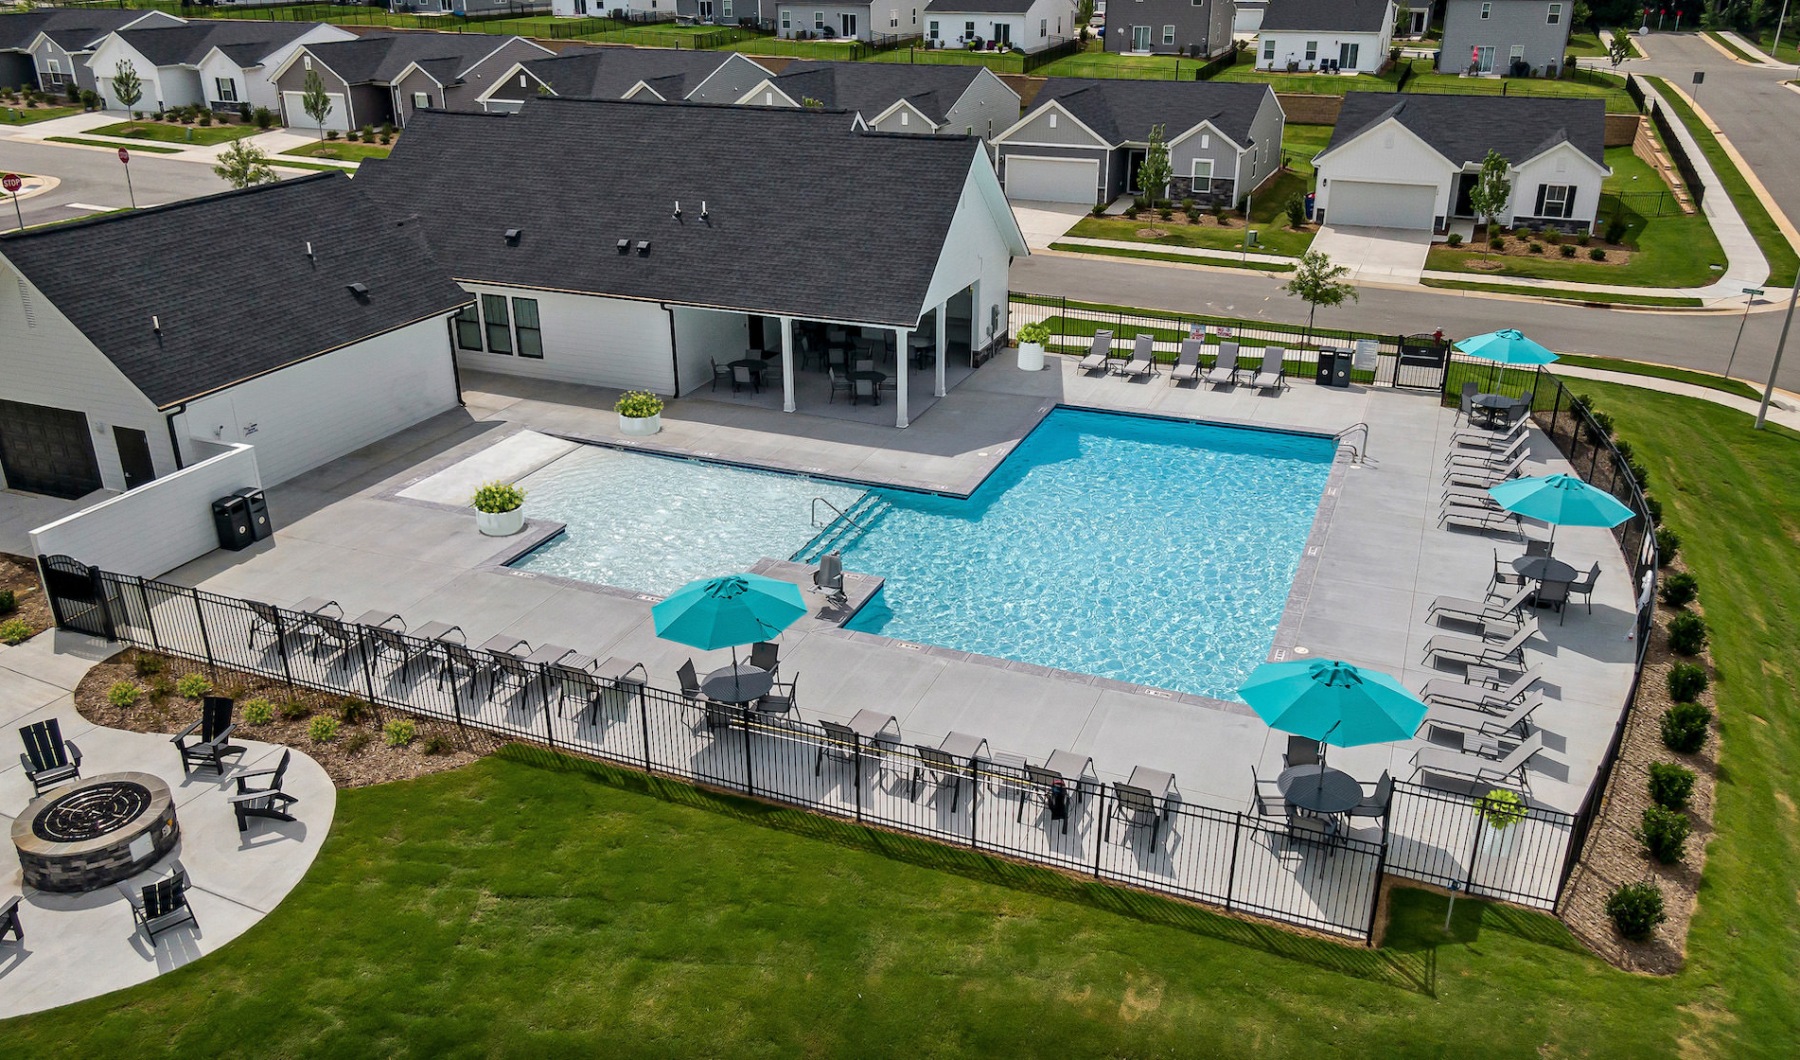 Image of neighborhood clubhouse with pool and fire pit